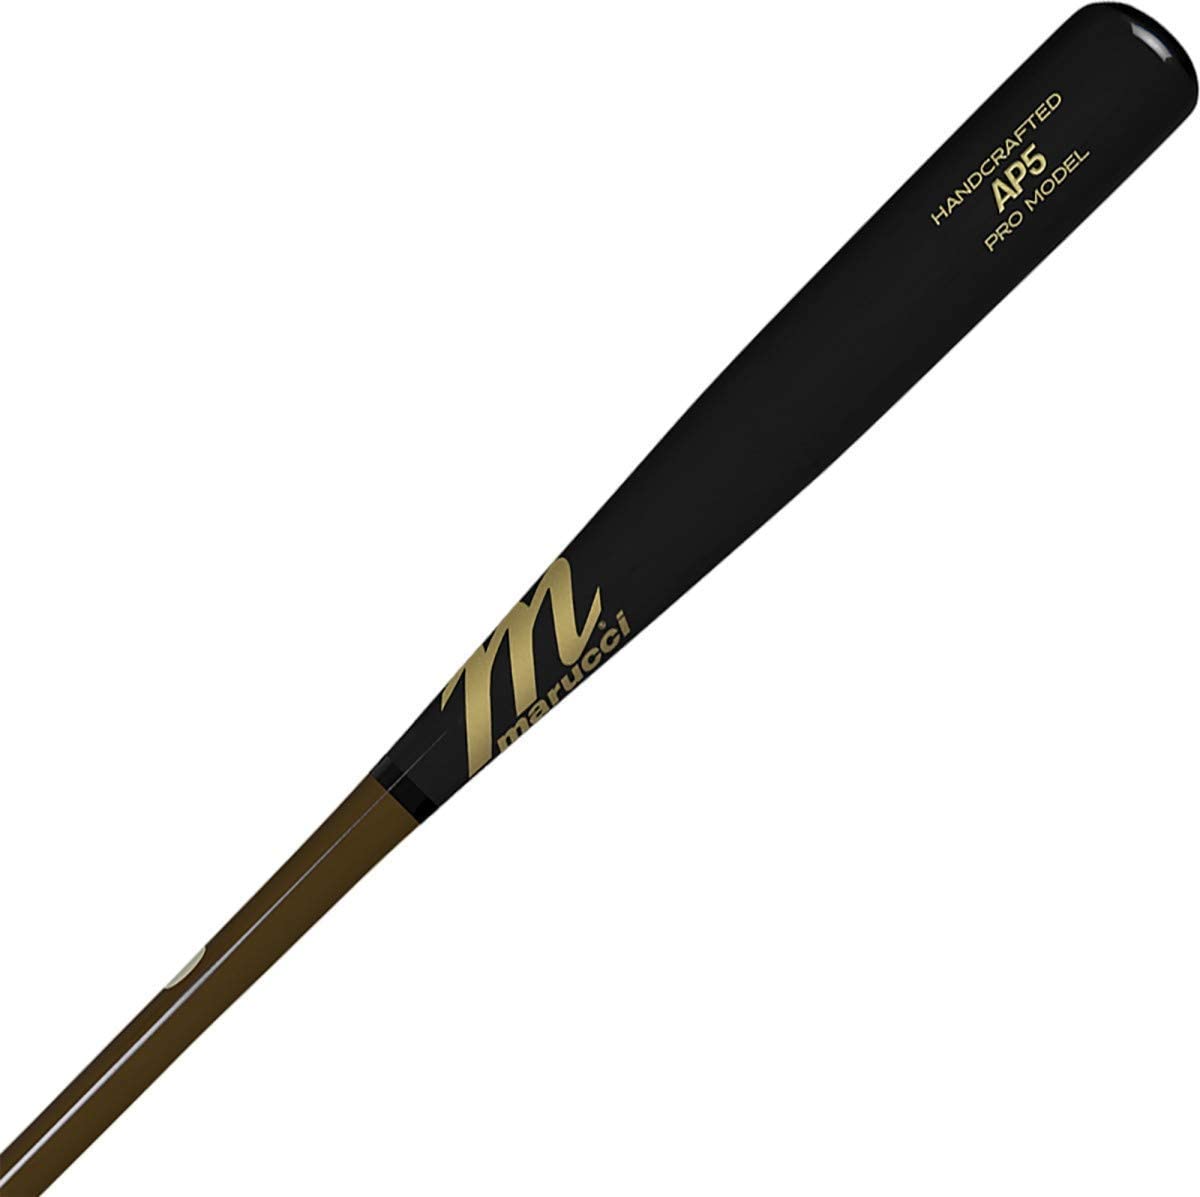 marucci-ap5-maple-pro-wood-baseball-bat-32-inch-brown-black MVE2AP5-BRBK-32 Marucci 840058700060 Knob Tapered. Handle Tapered. Barrel Large. Feel End Loaded. Handcrafted from